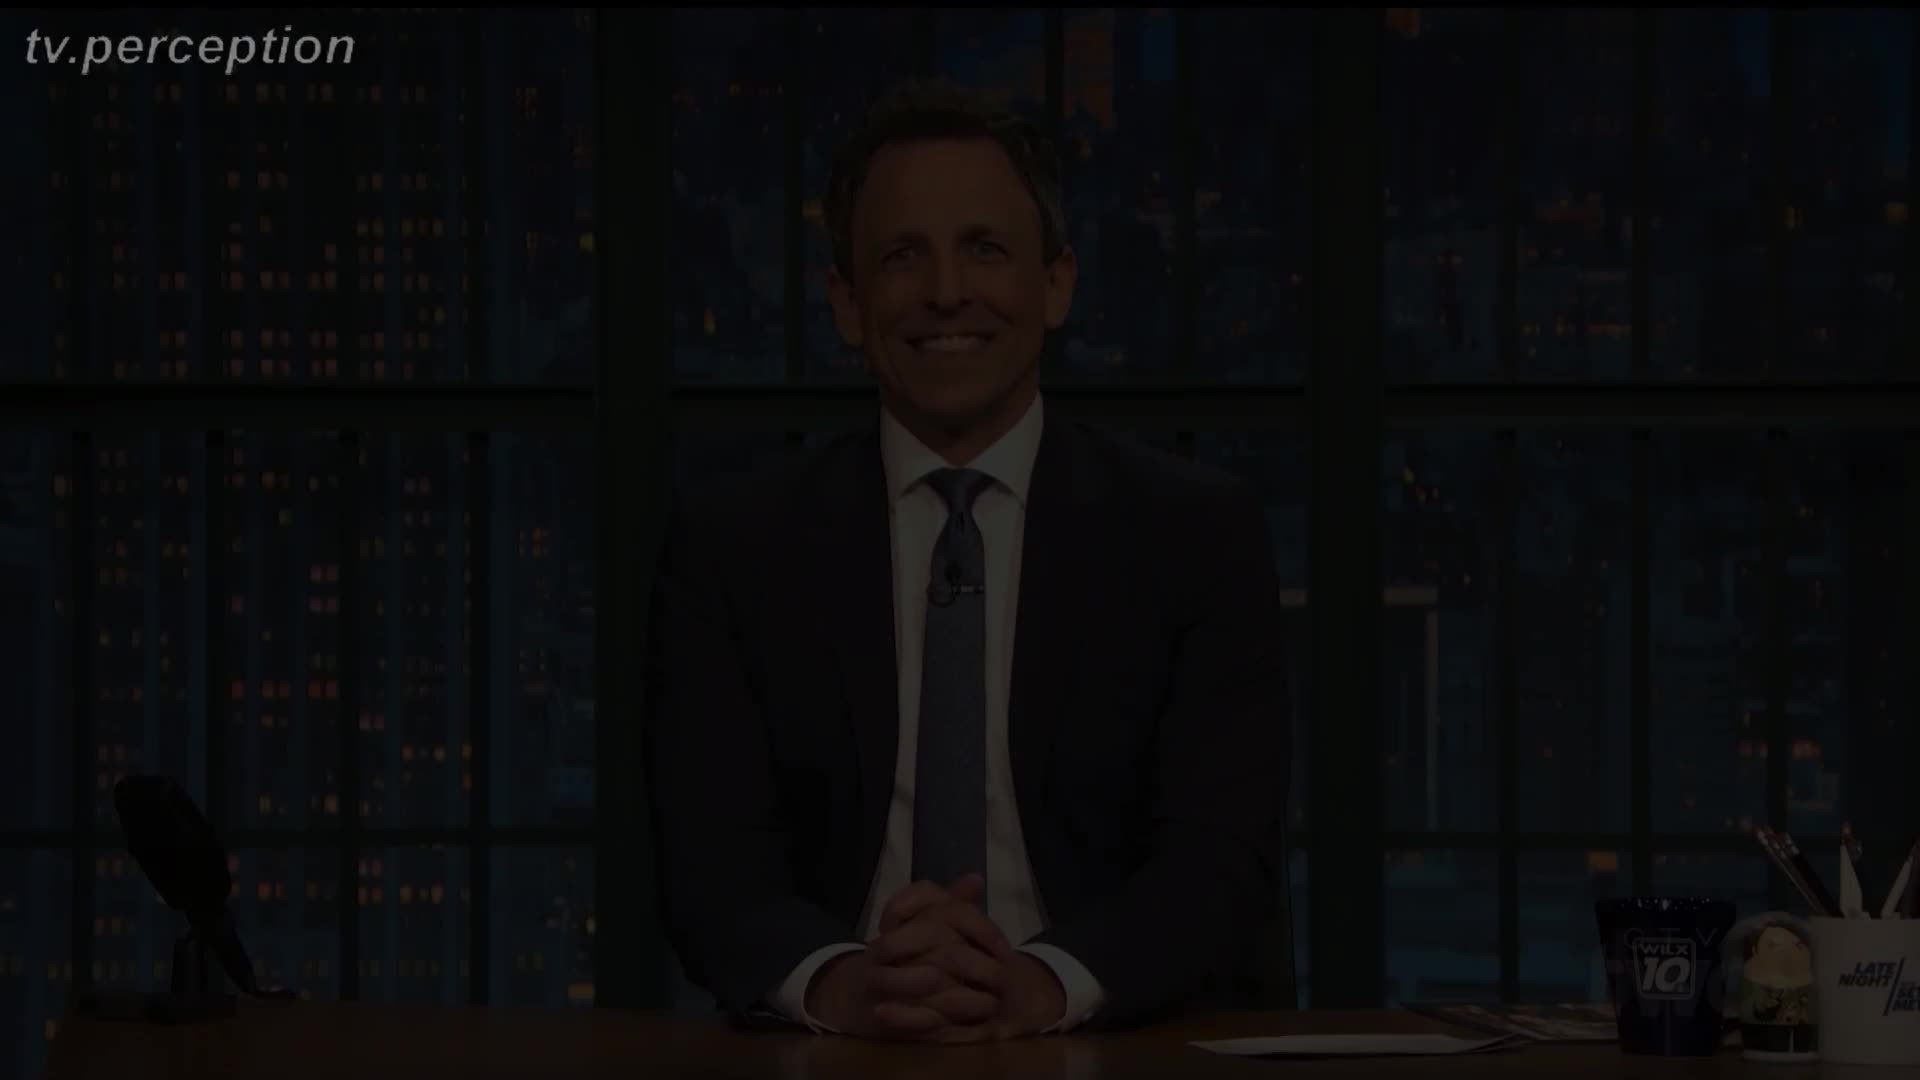 Watch the Video by tv.perception with the username @tv.perception, posted on April 6, 2023. The post is about the topic Celebrity Feet and Legs. and the text says 'Priyanka Chopra's legs and décolletage nicely displayed for all on "Late Night with Seth Meyers."

Recorded on 3 May, 2018.

#PriyankaChopra #Legs #Celeb'